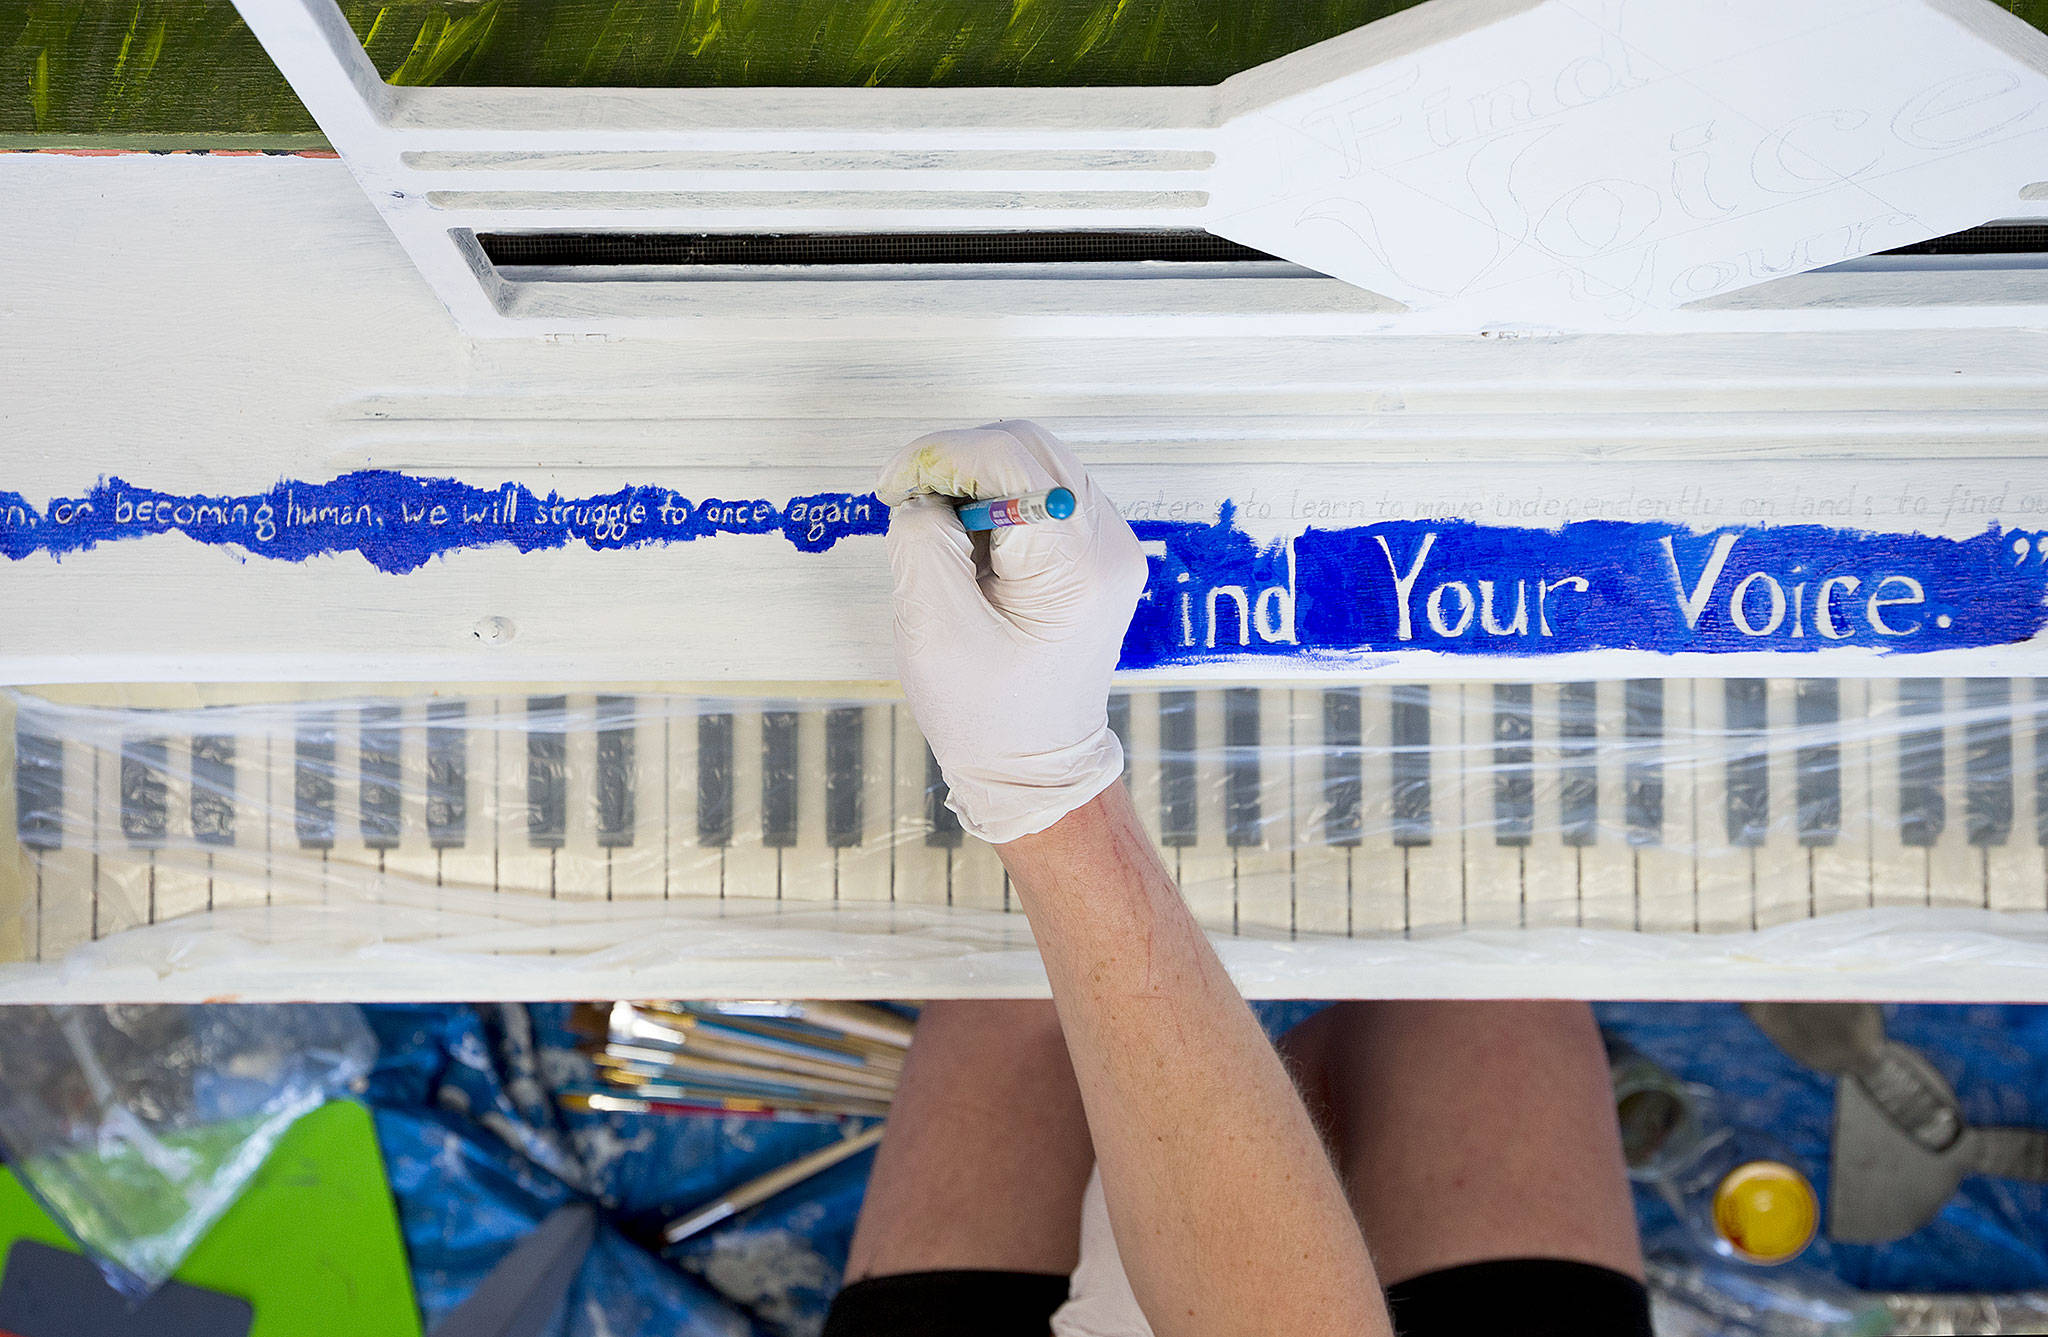 Artist Nicoli Dominn outlines a personal quote on a piano. Dominn is painting the newest piano addition to Everett’s annual Street Tunes, a Greek interpretation of “The Little Mermaid.” (Andy Bronson / The Herald)